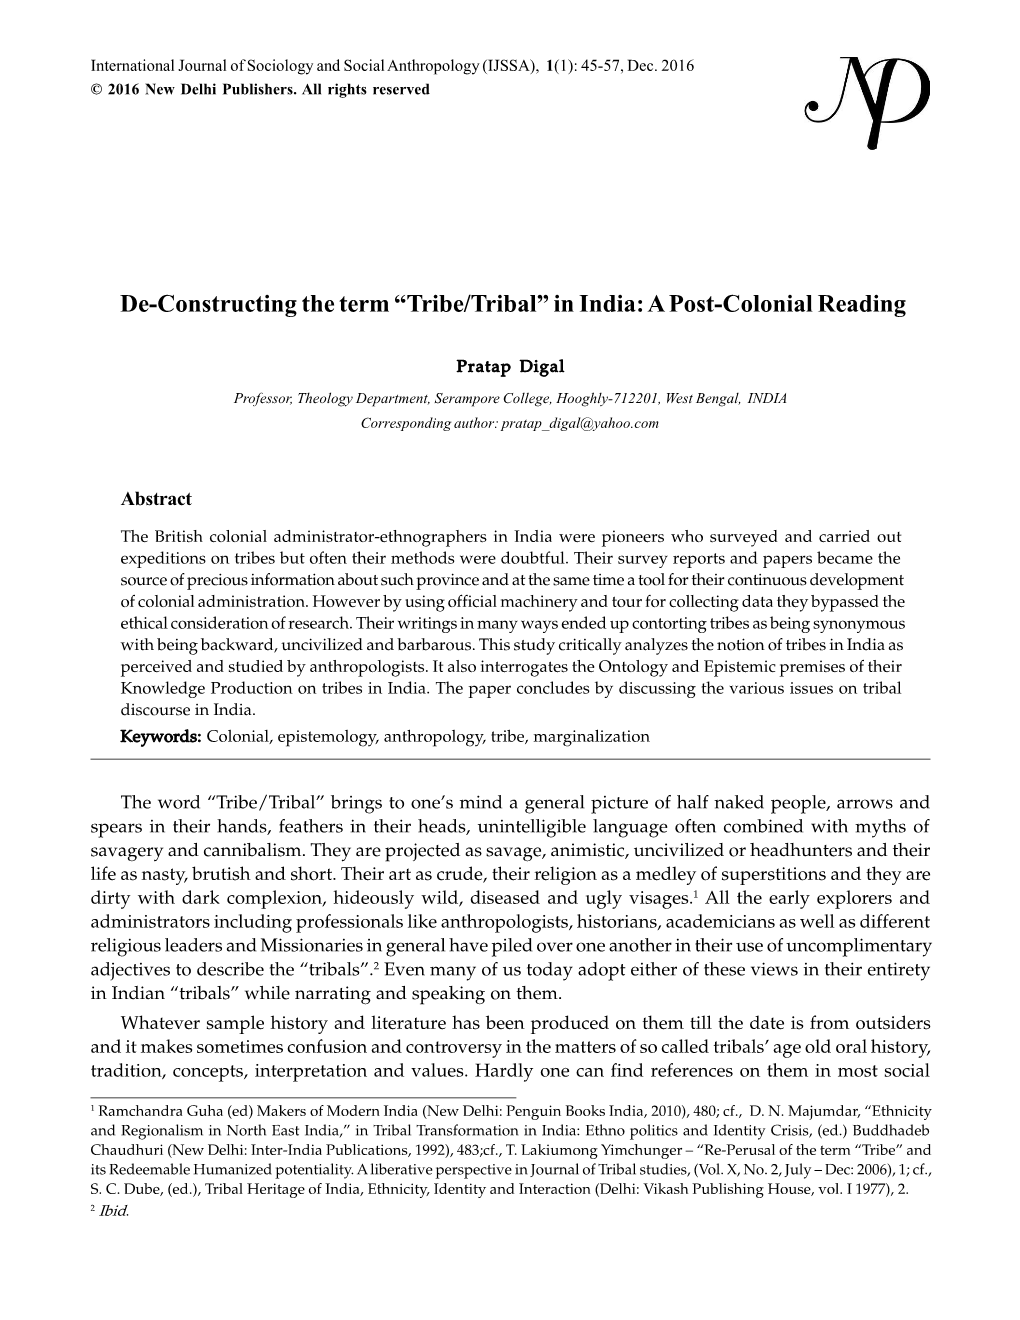 Tribe/Tribal” in India: a Post-Colonial Reading